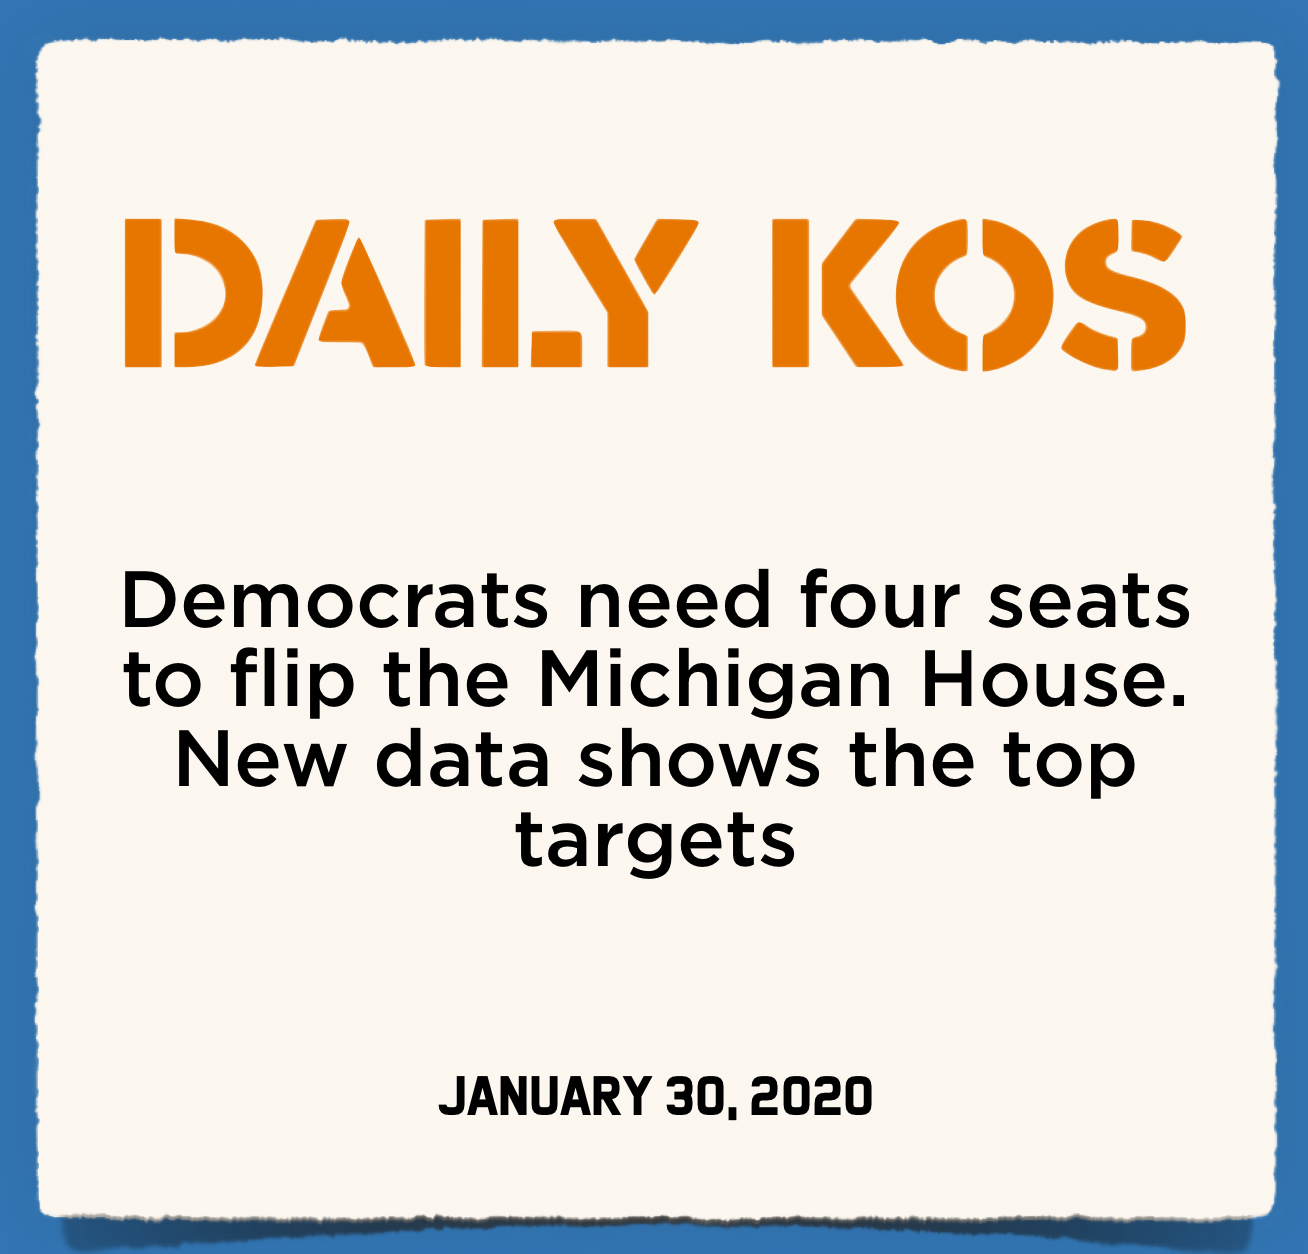 Daily Kos: Democrats need four seats to flip the Michigan House. New data shows the top targets